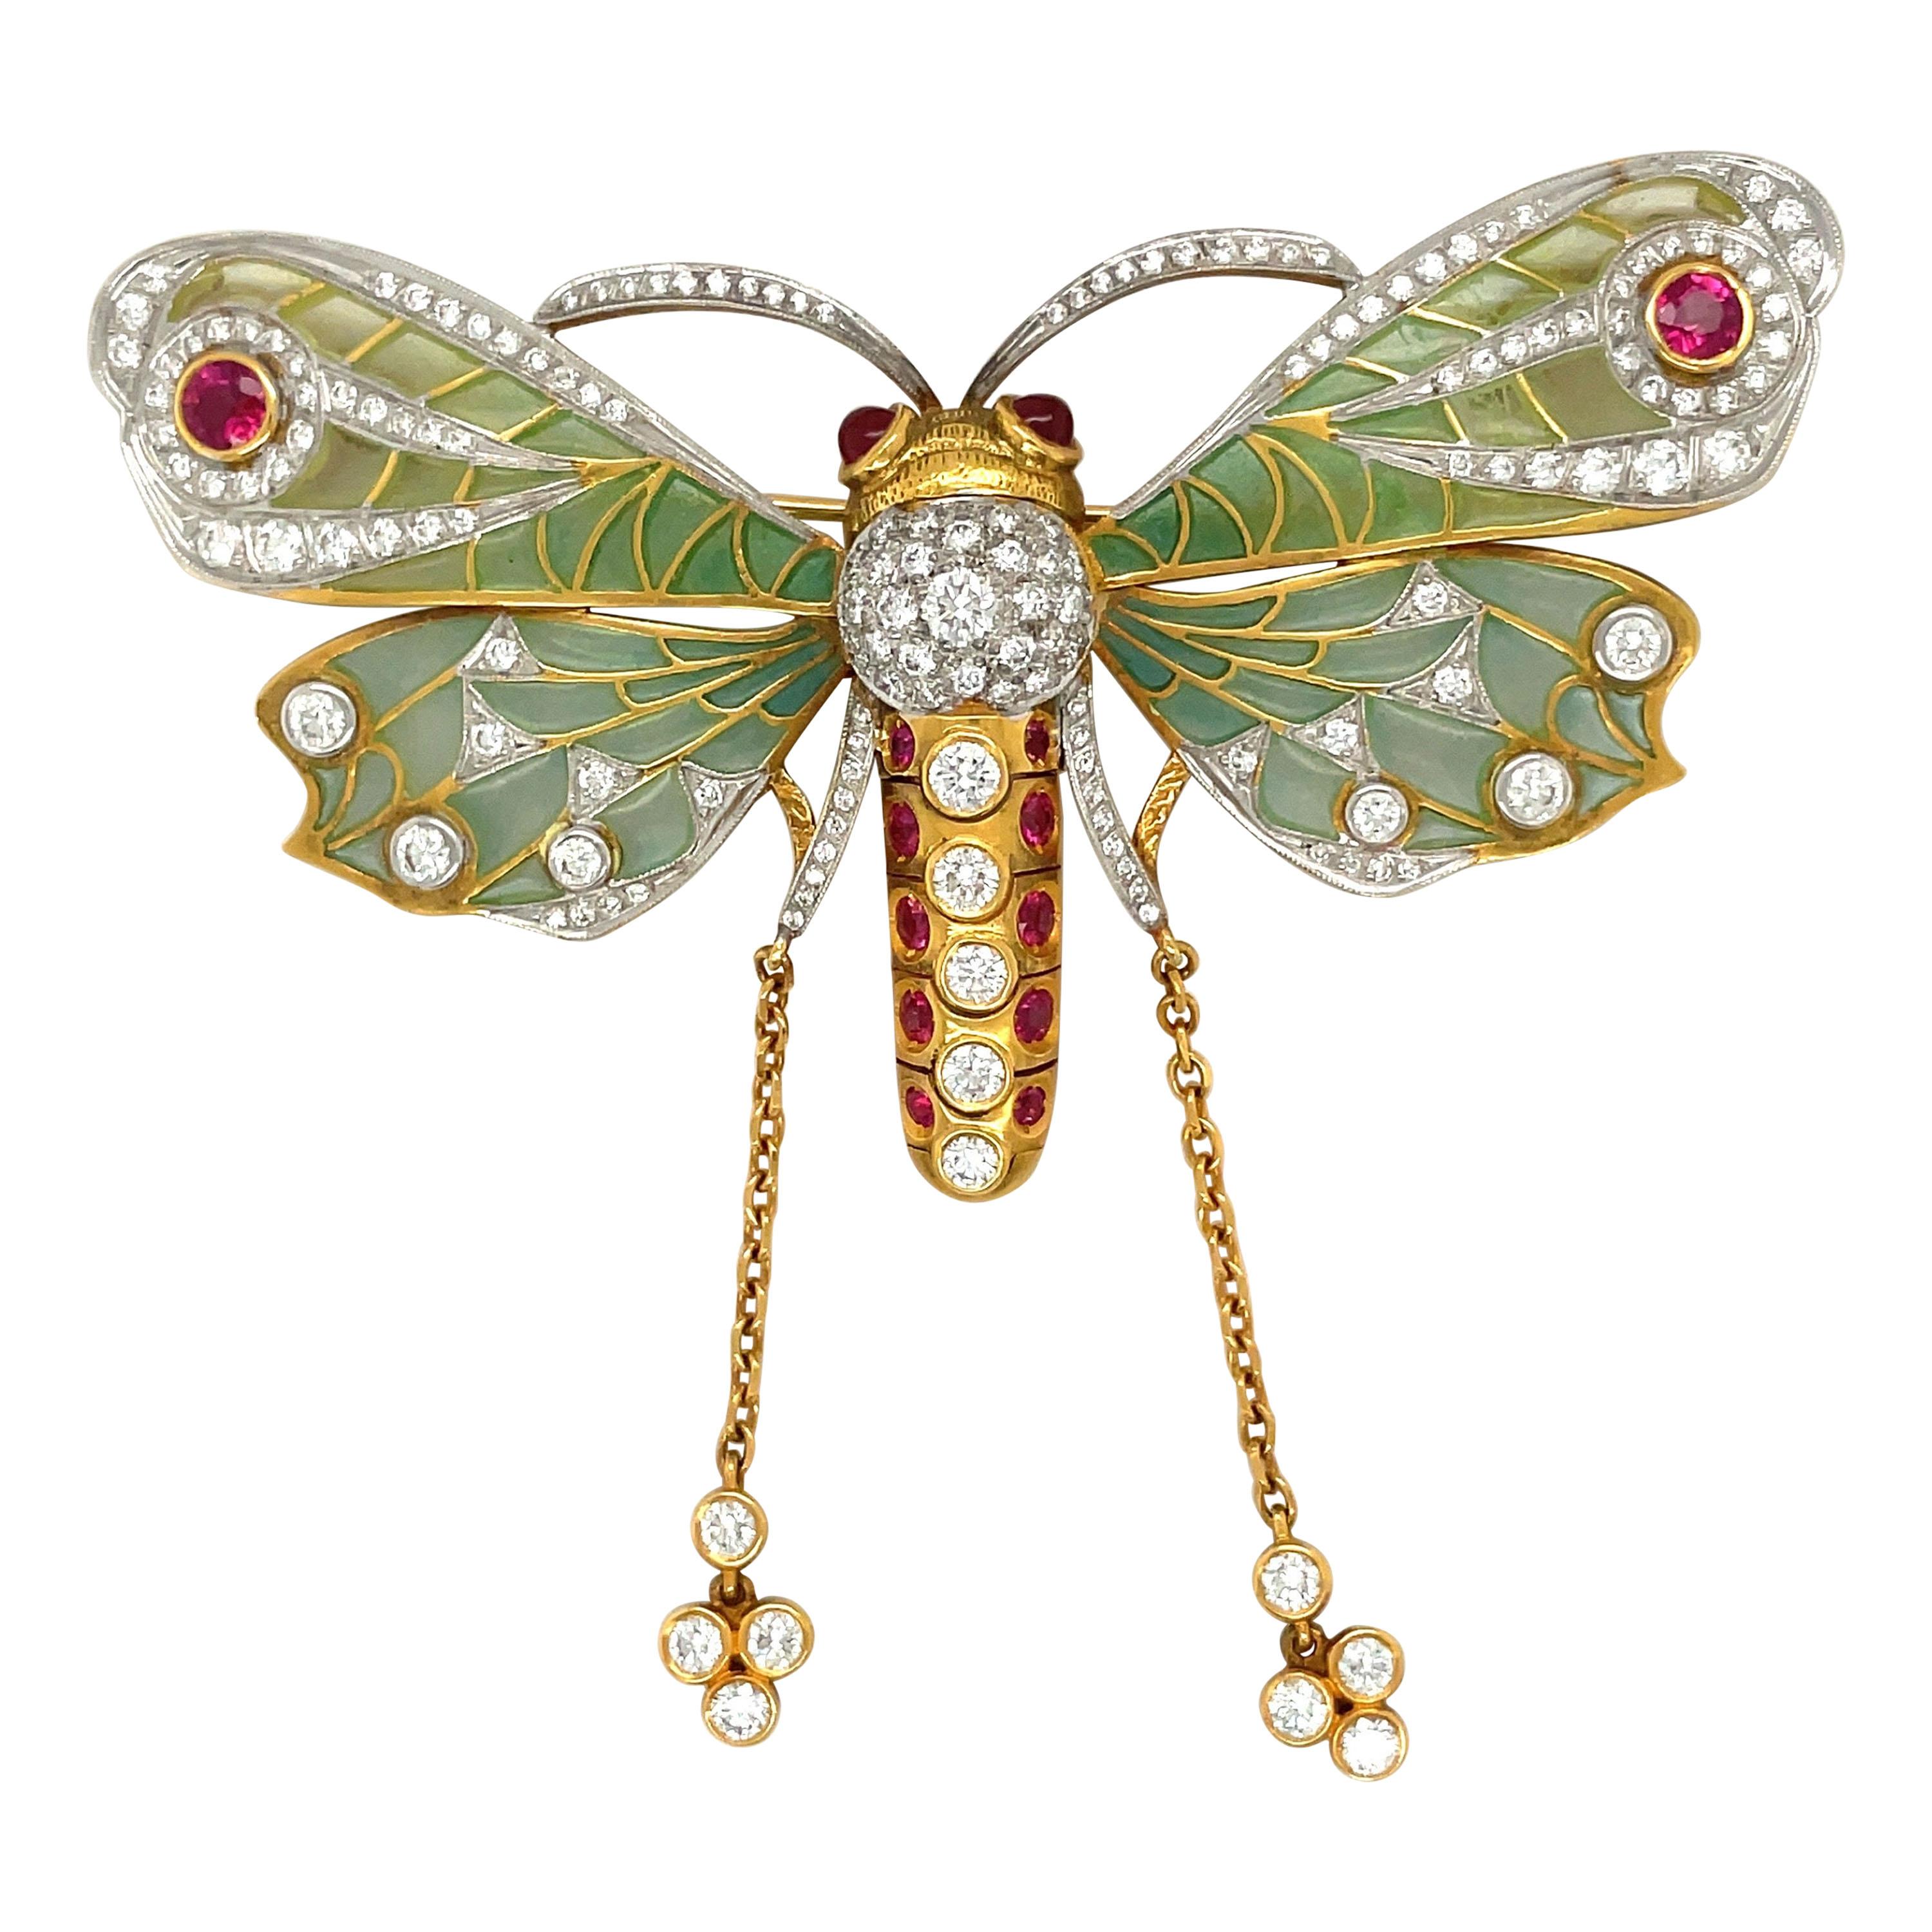 Masriera 18KT Yellow Gold Dragonfly Brooch/ Pendant 2.94Ct Diamond 1.69Ct Ruby For Sale